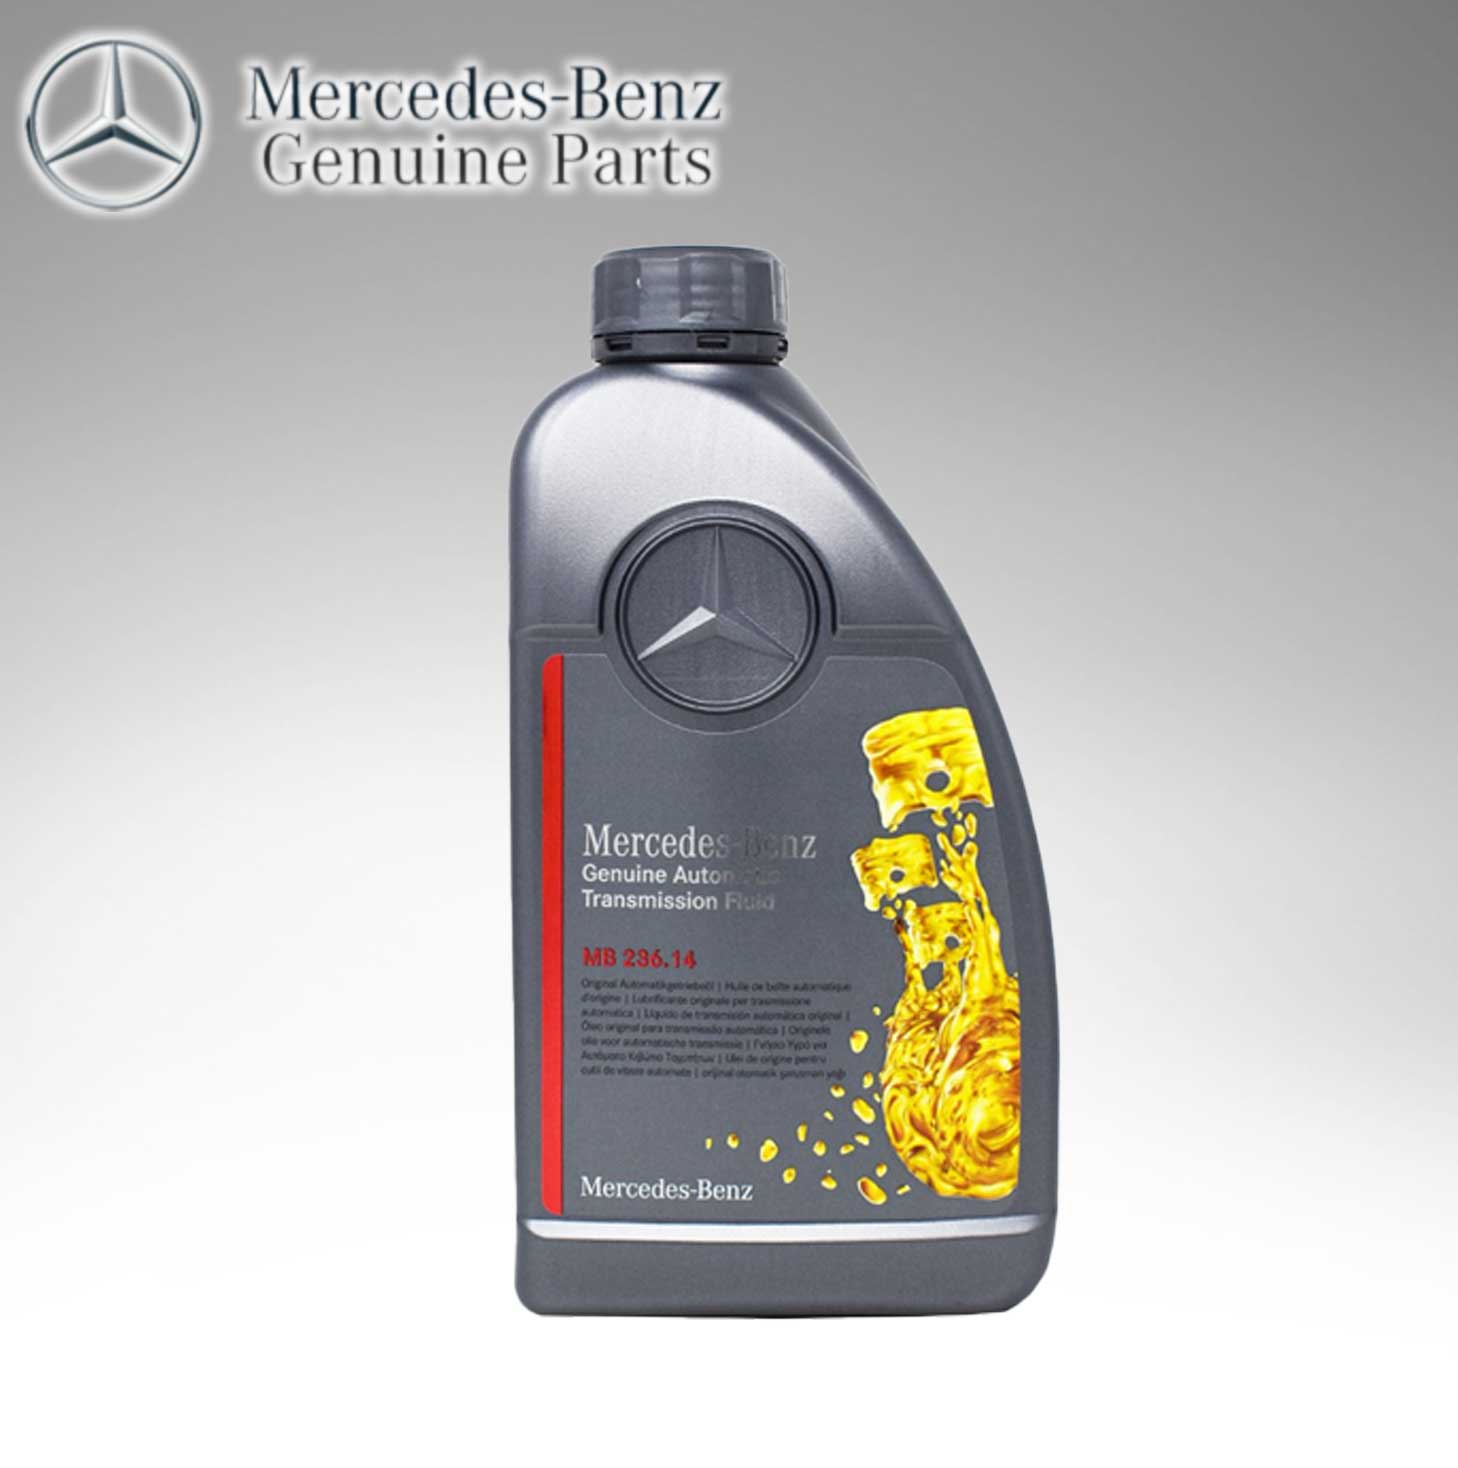 Mercedes Benz Genuine GEAR OIL AUTOMATIC 236.14 (GERMANY) 001989680318